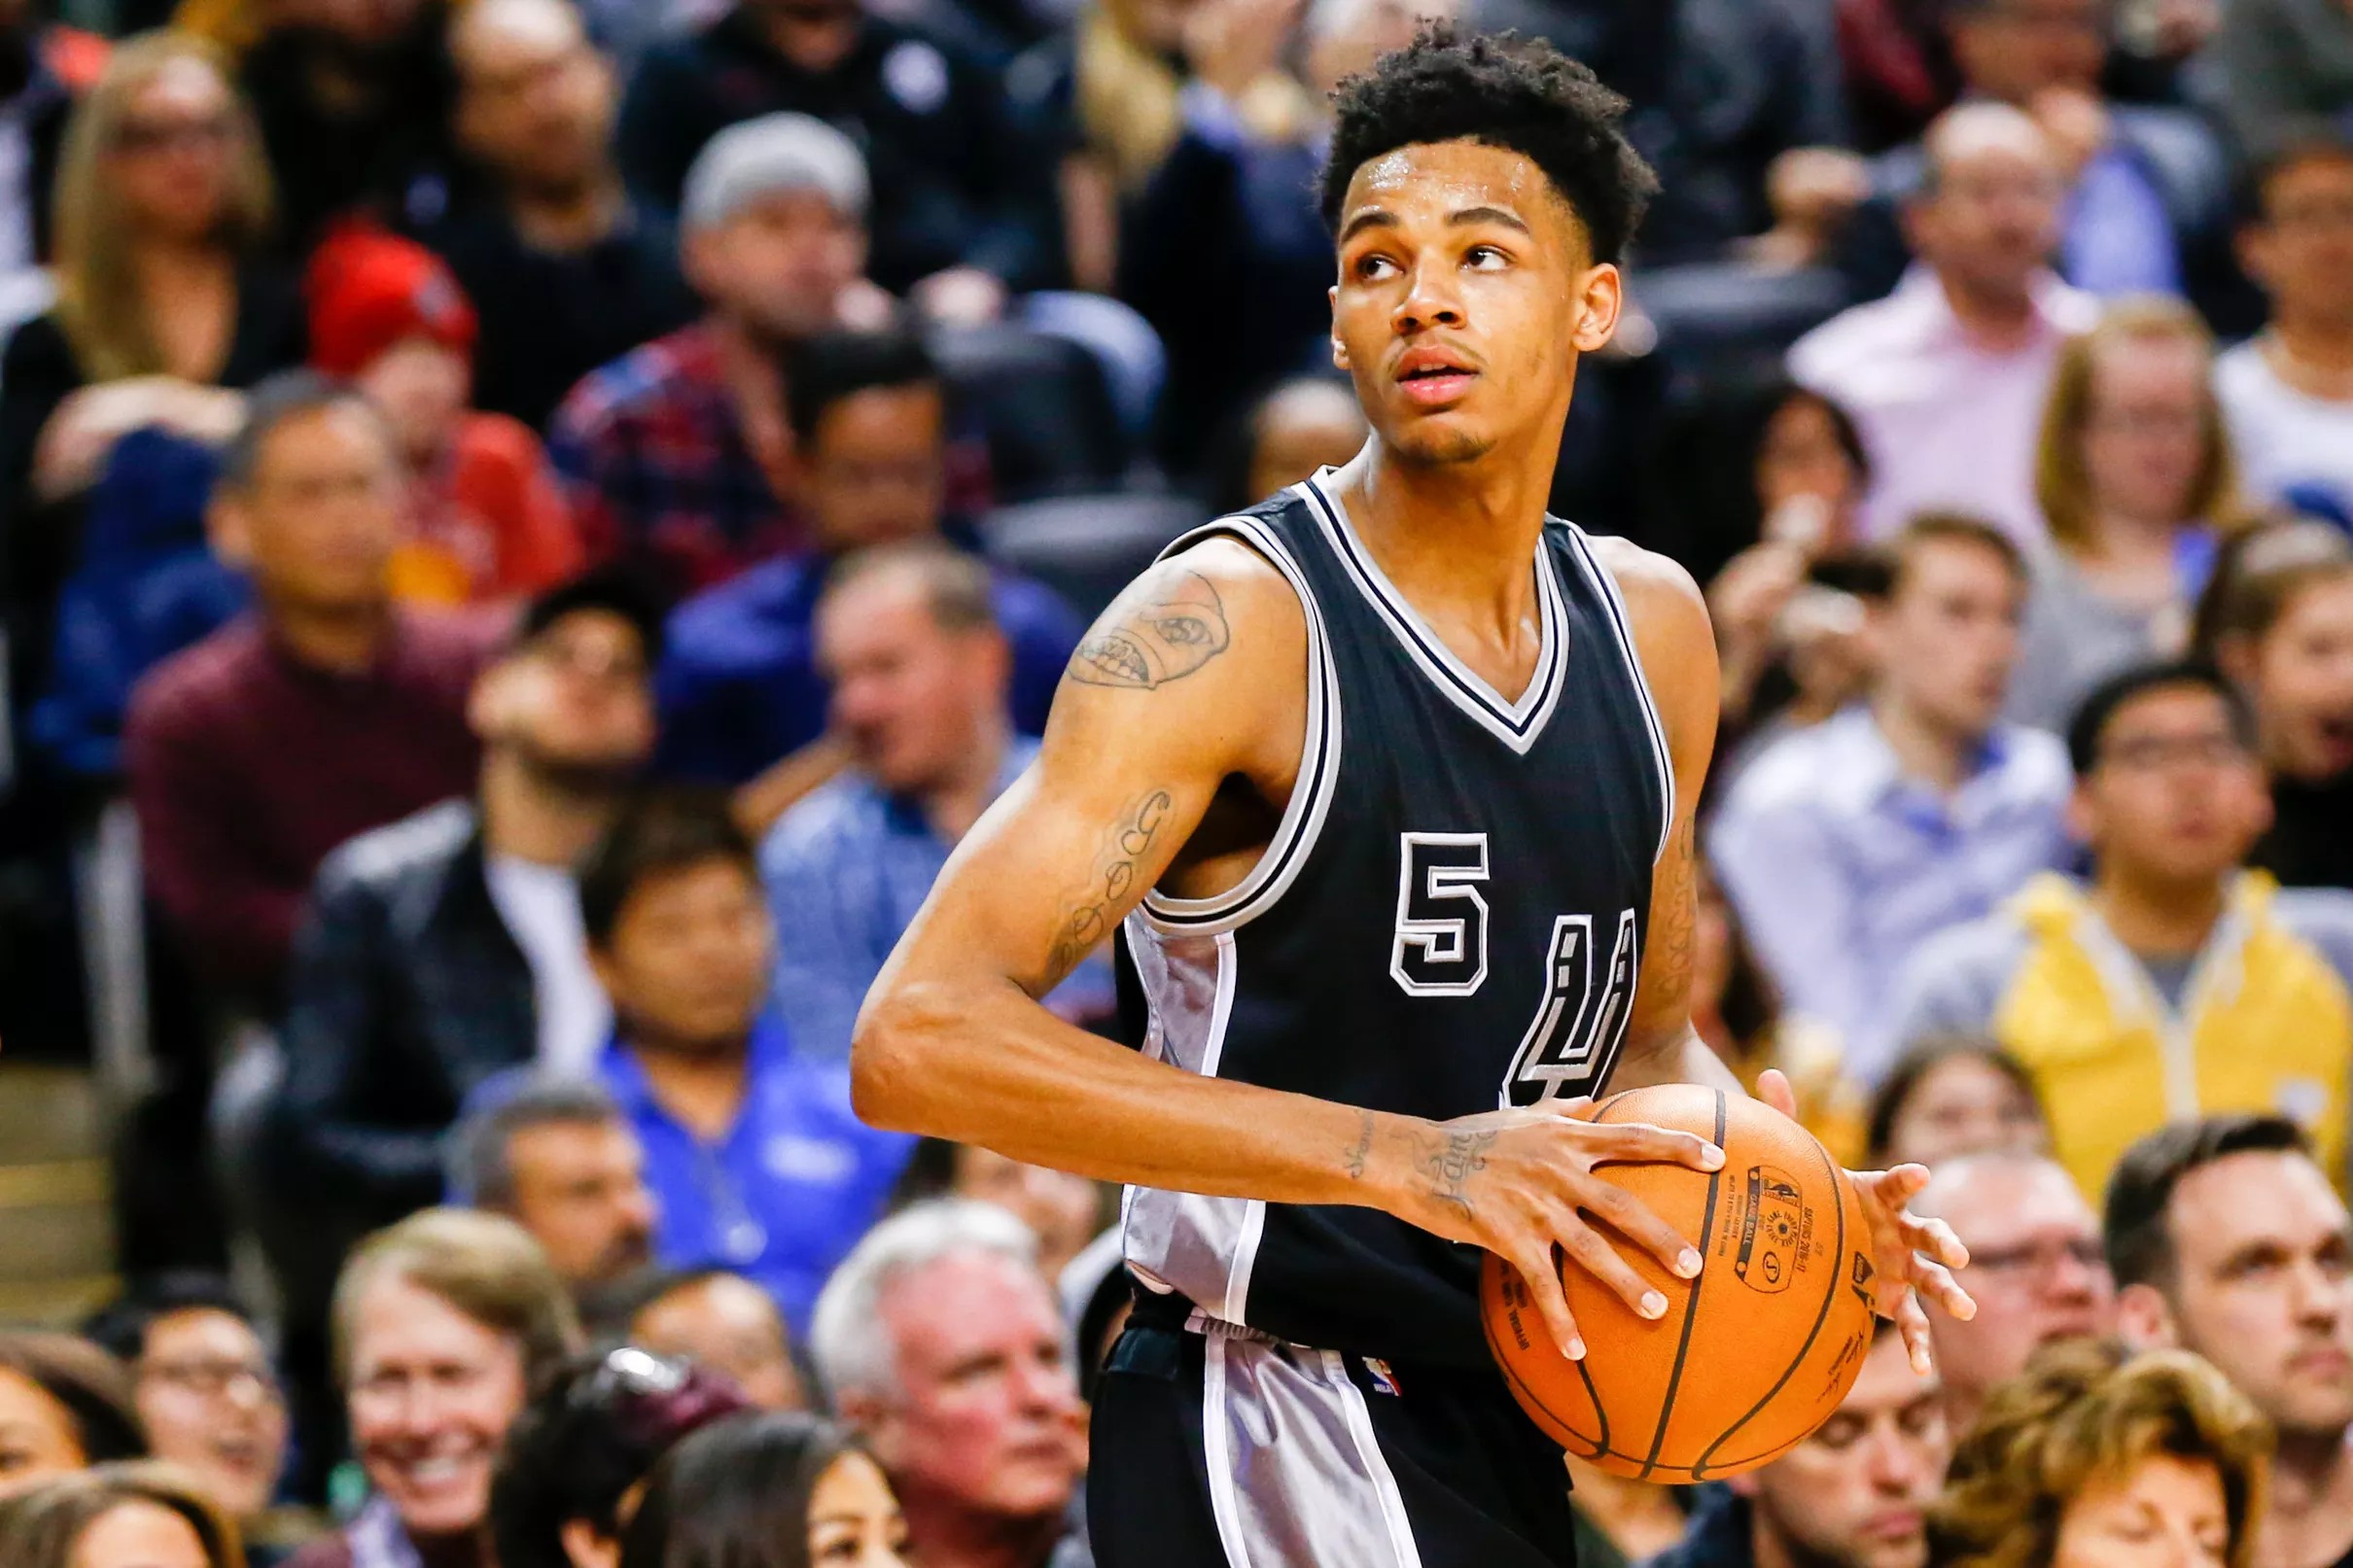 Dejounte Murray 2016-17 season review: His time is coming.